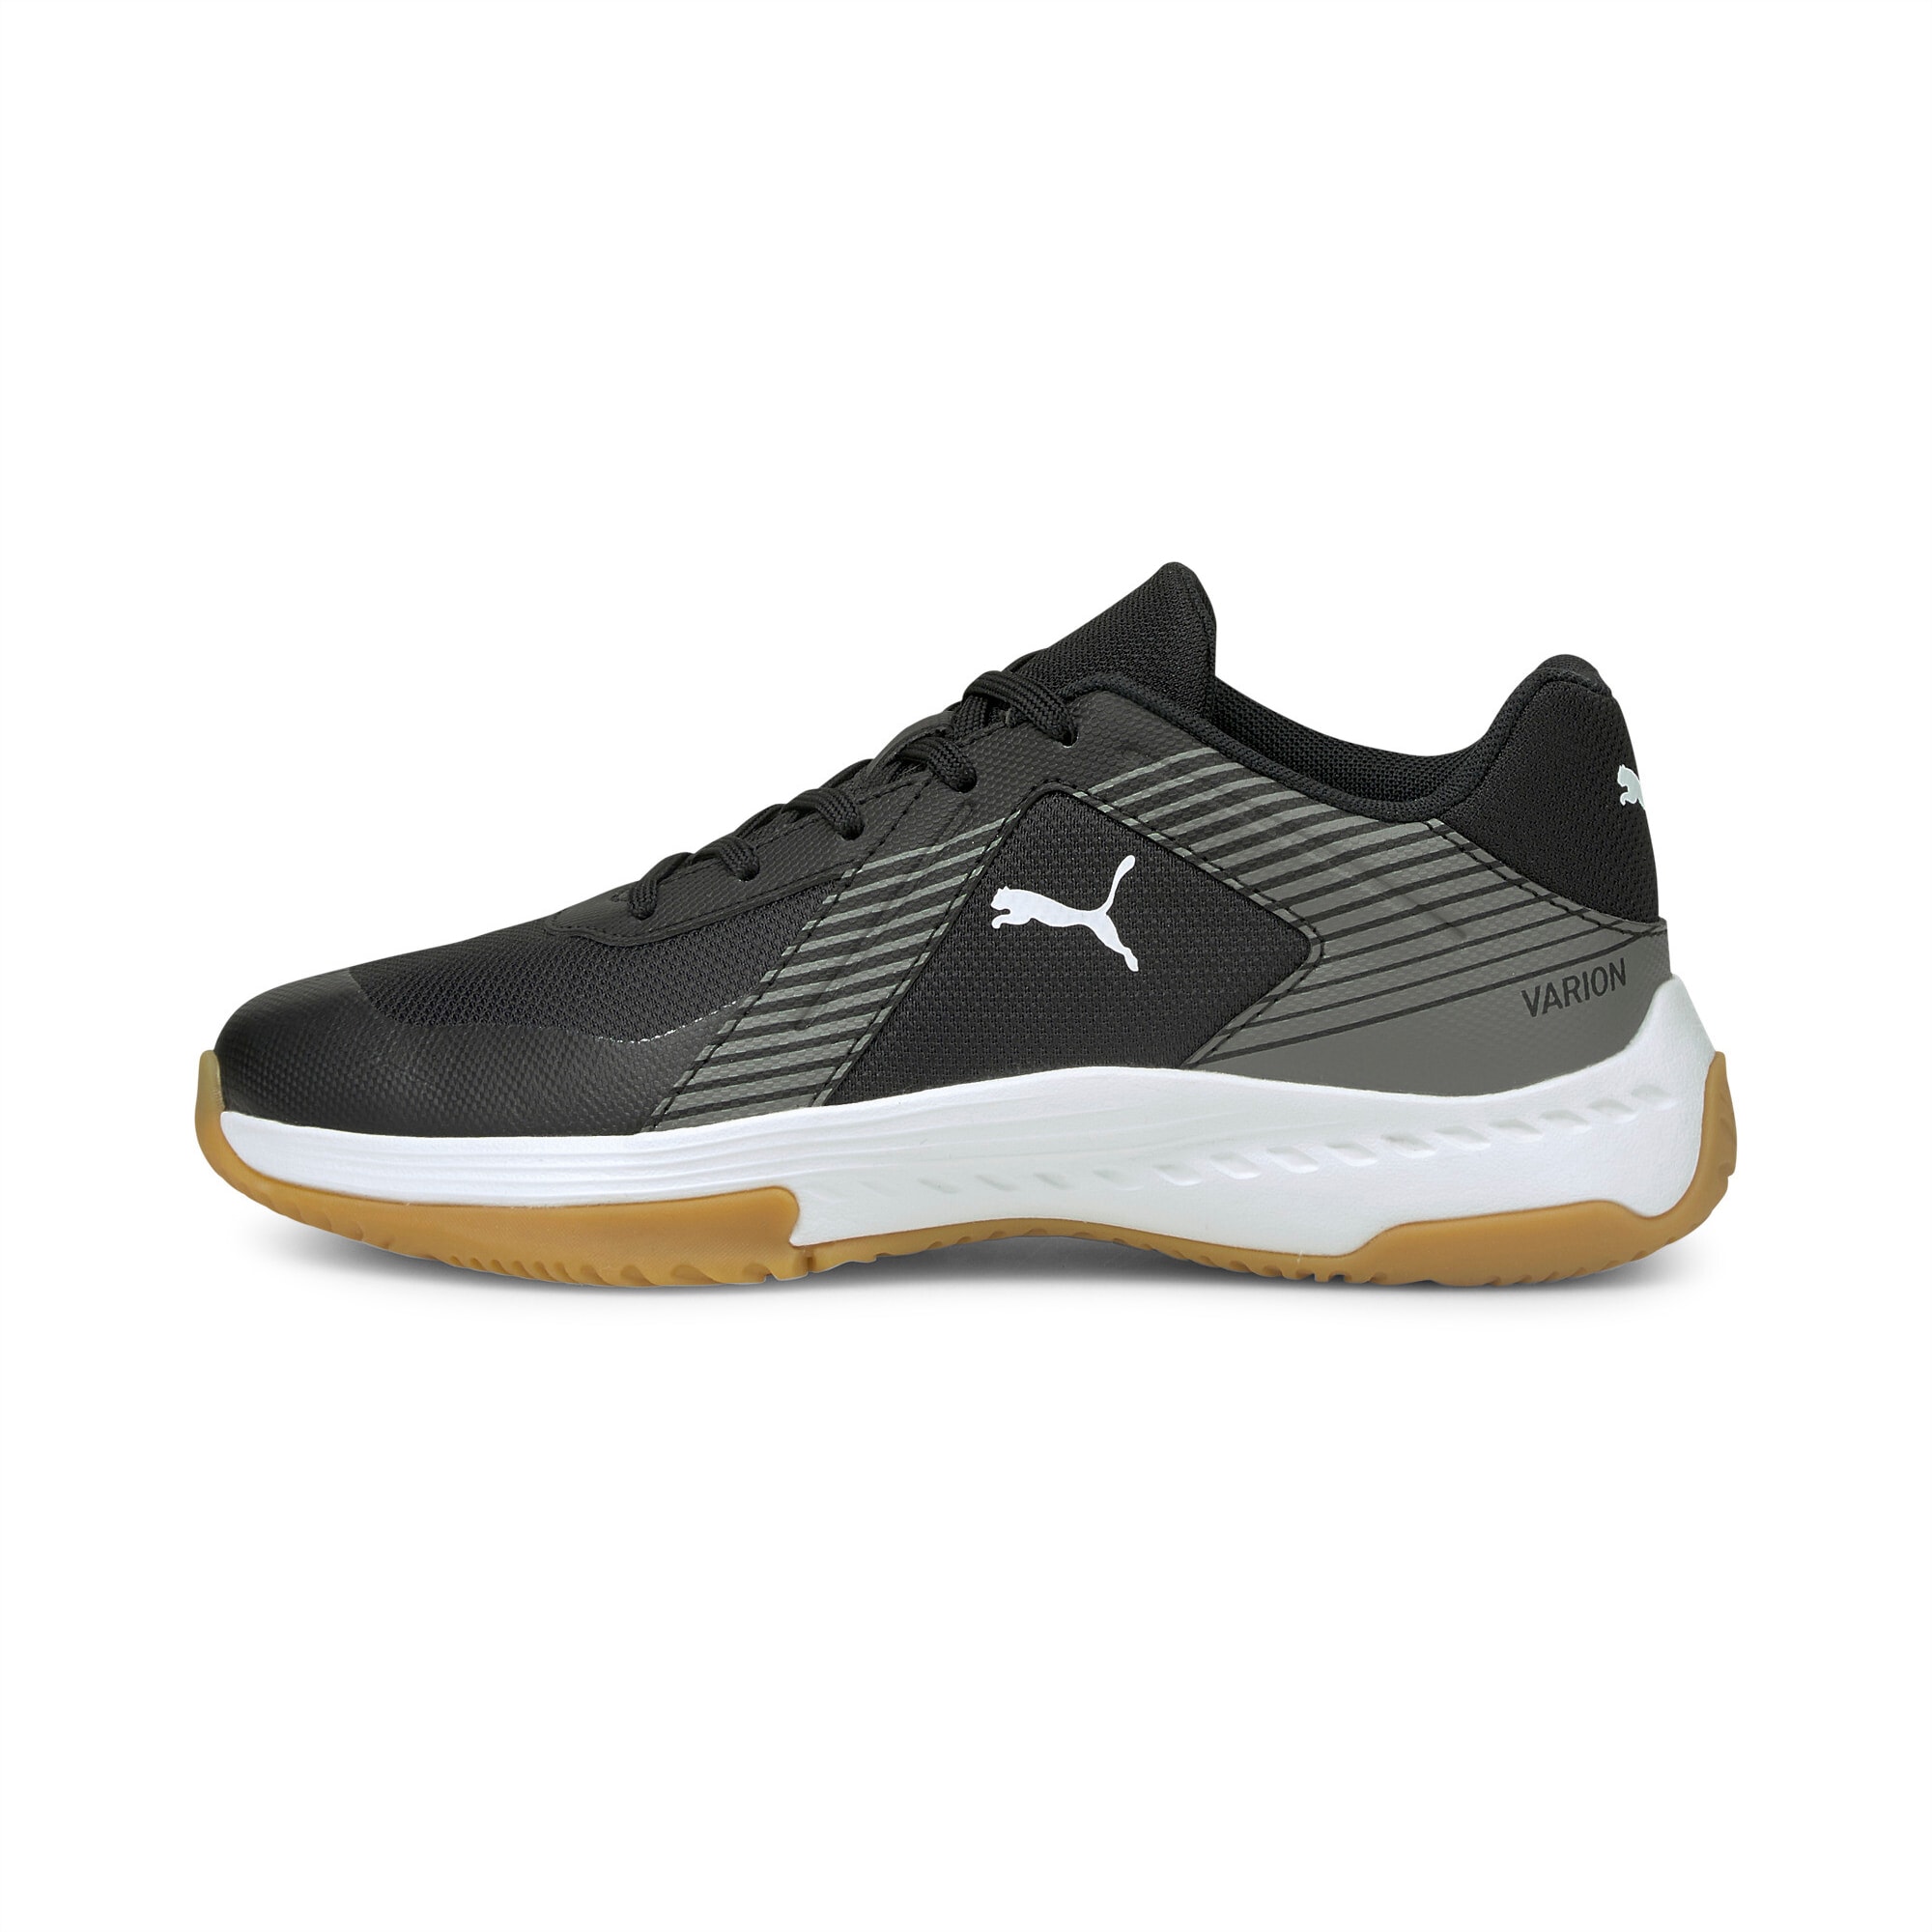 Varion Youth Indoor Sports Shoes | PUMA